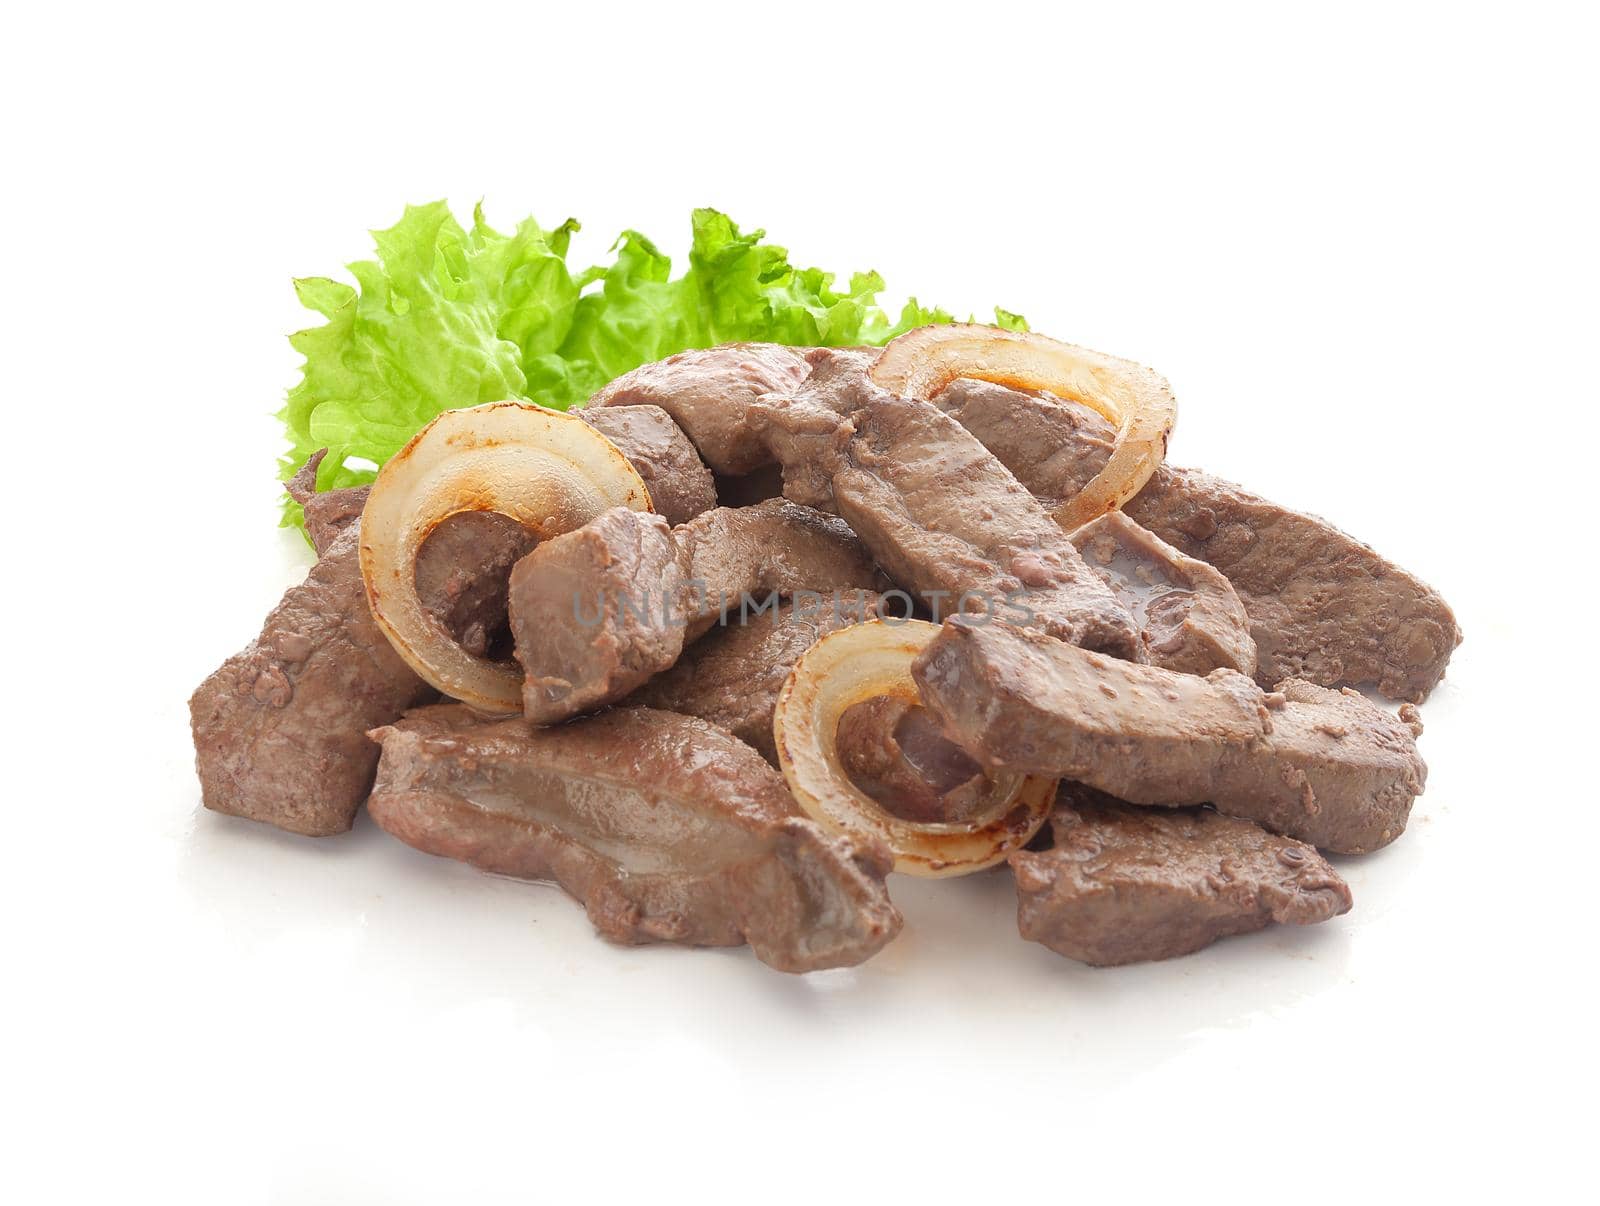 Fried liver by Angorius